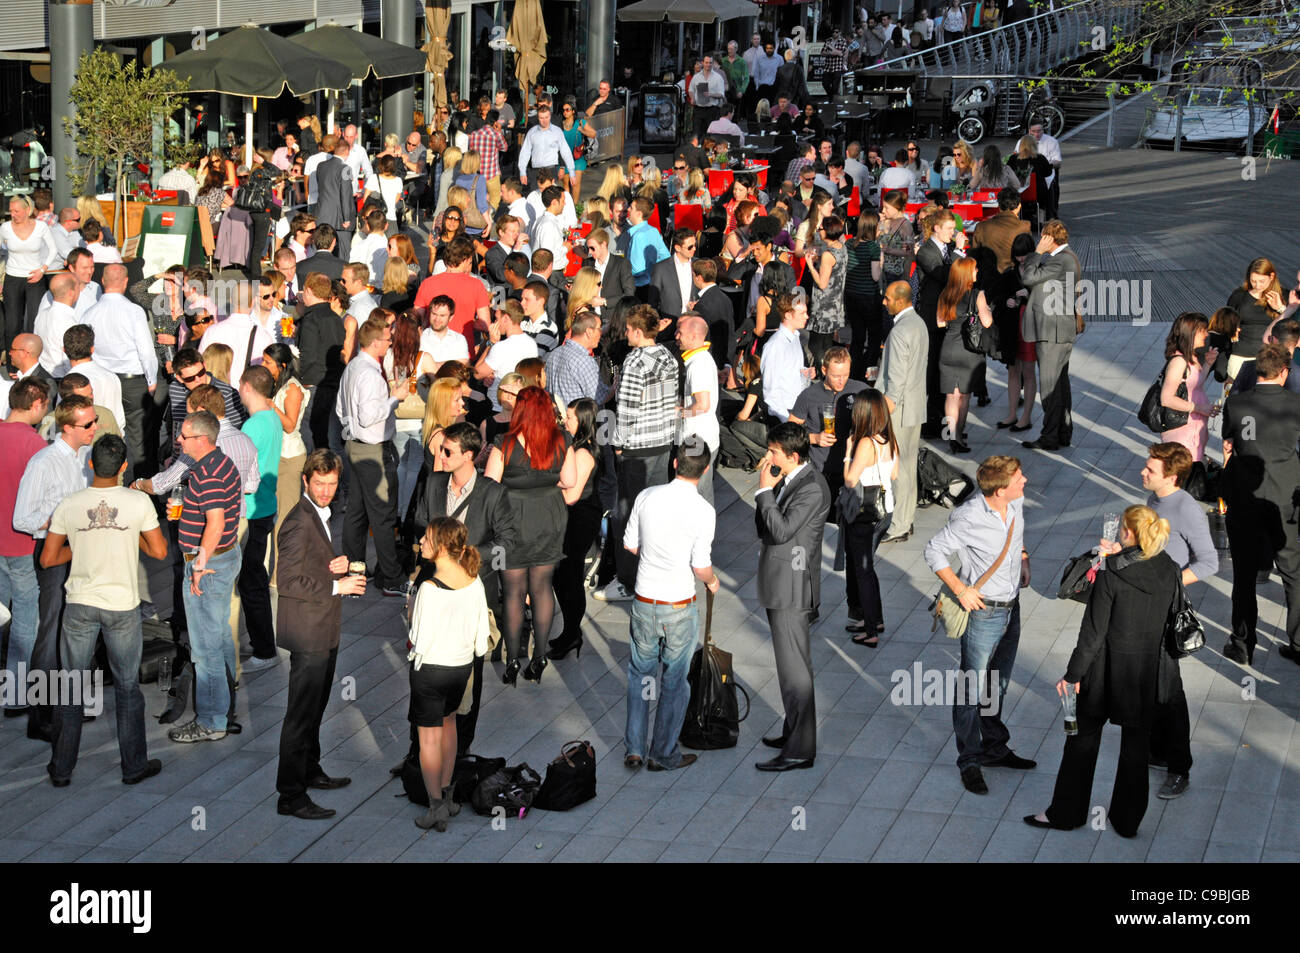 Aerial view of crowd of office workers after work lifestyle drinks group of people socialising outside bar St Katharines Dock Tower Hamlets London UK Stock Photo